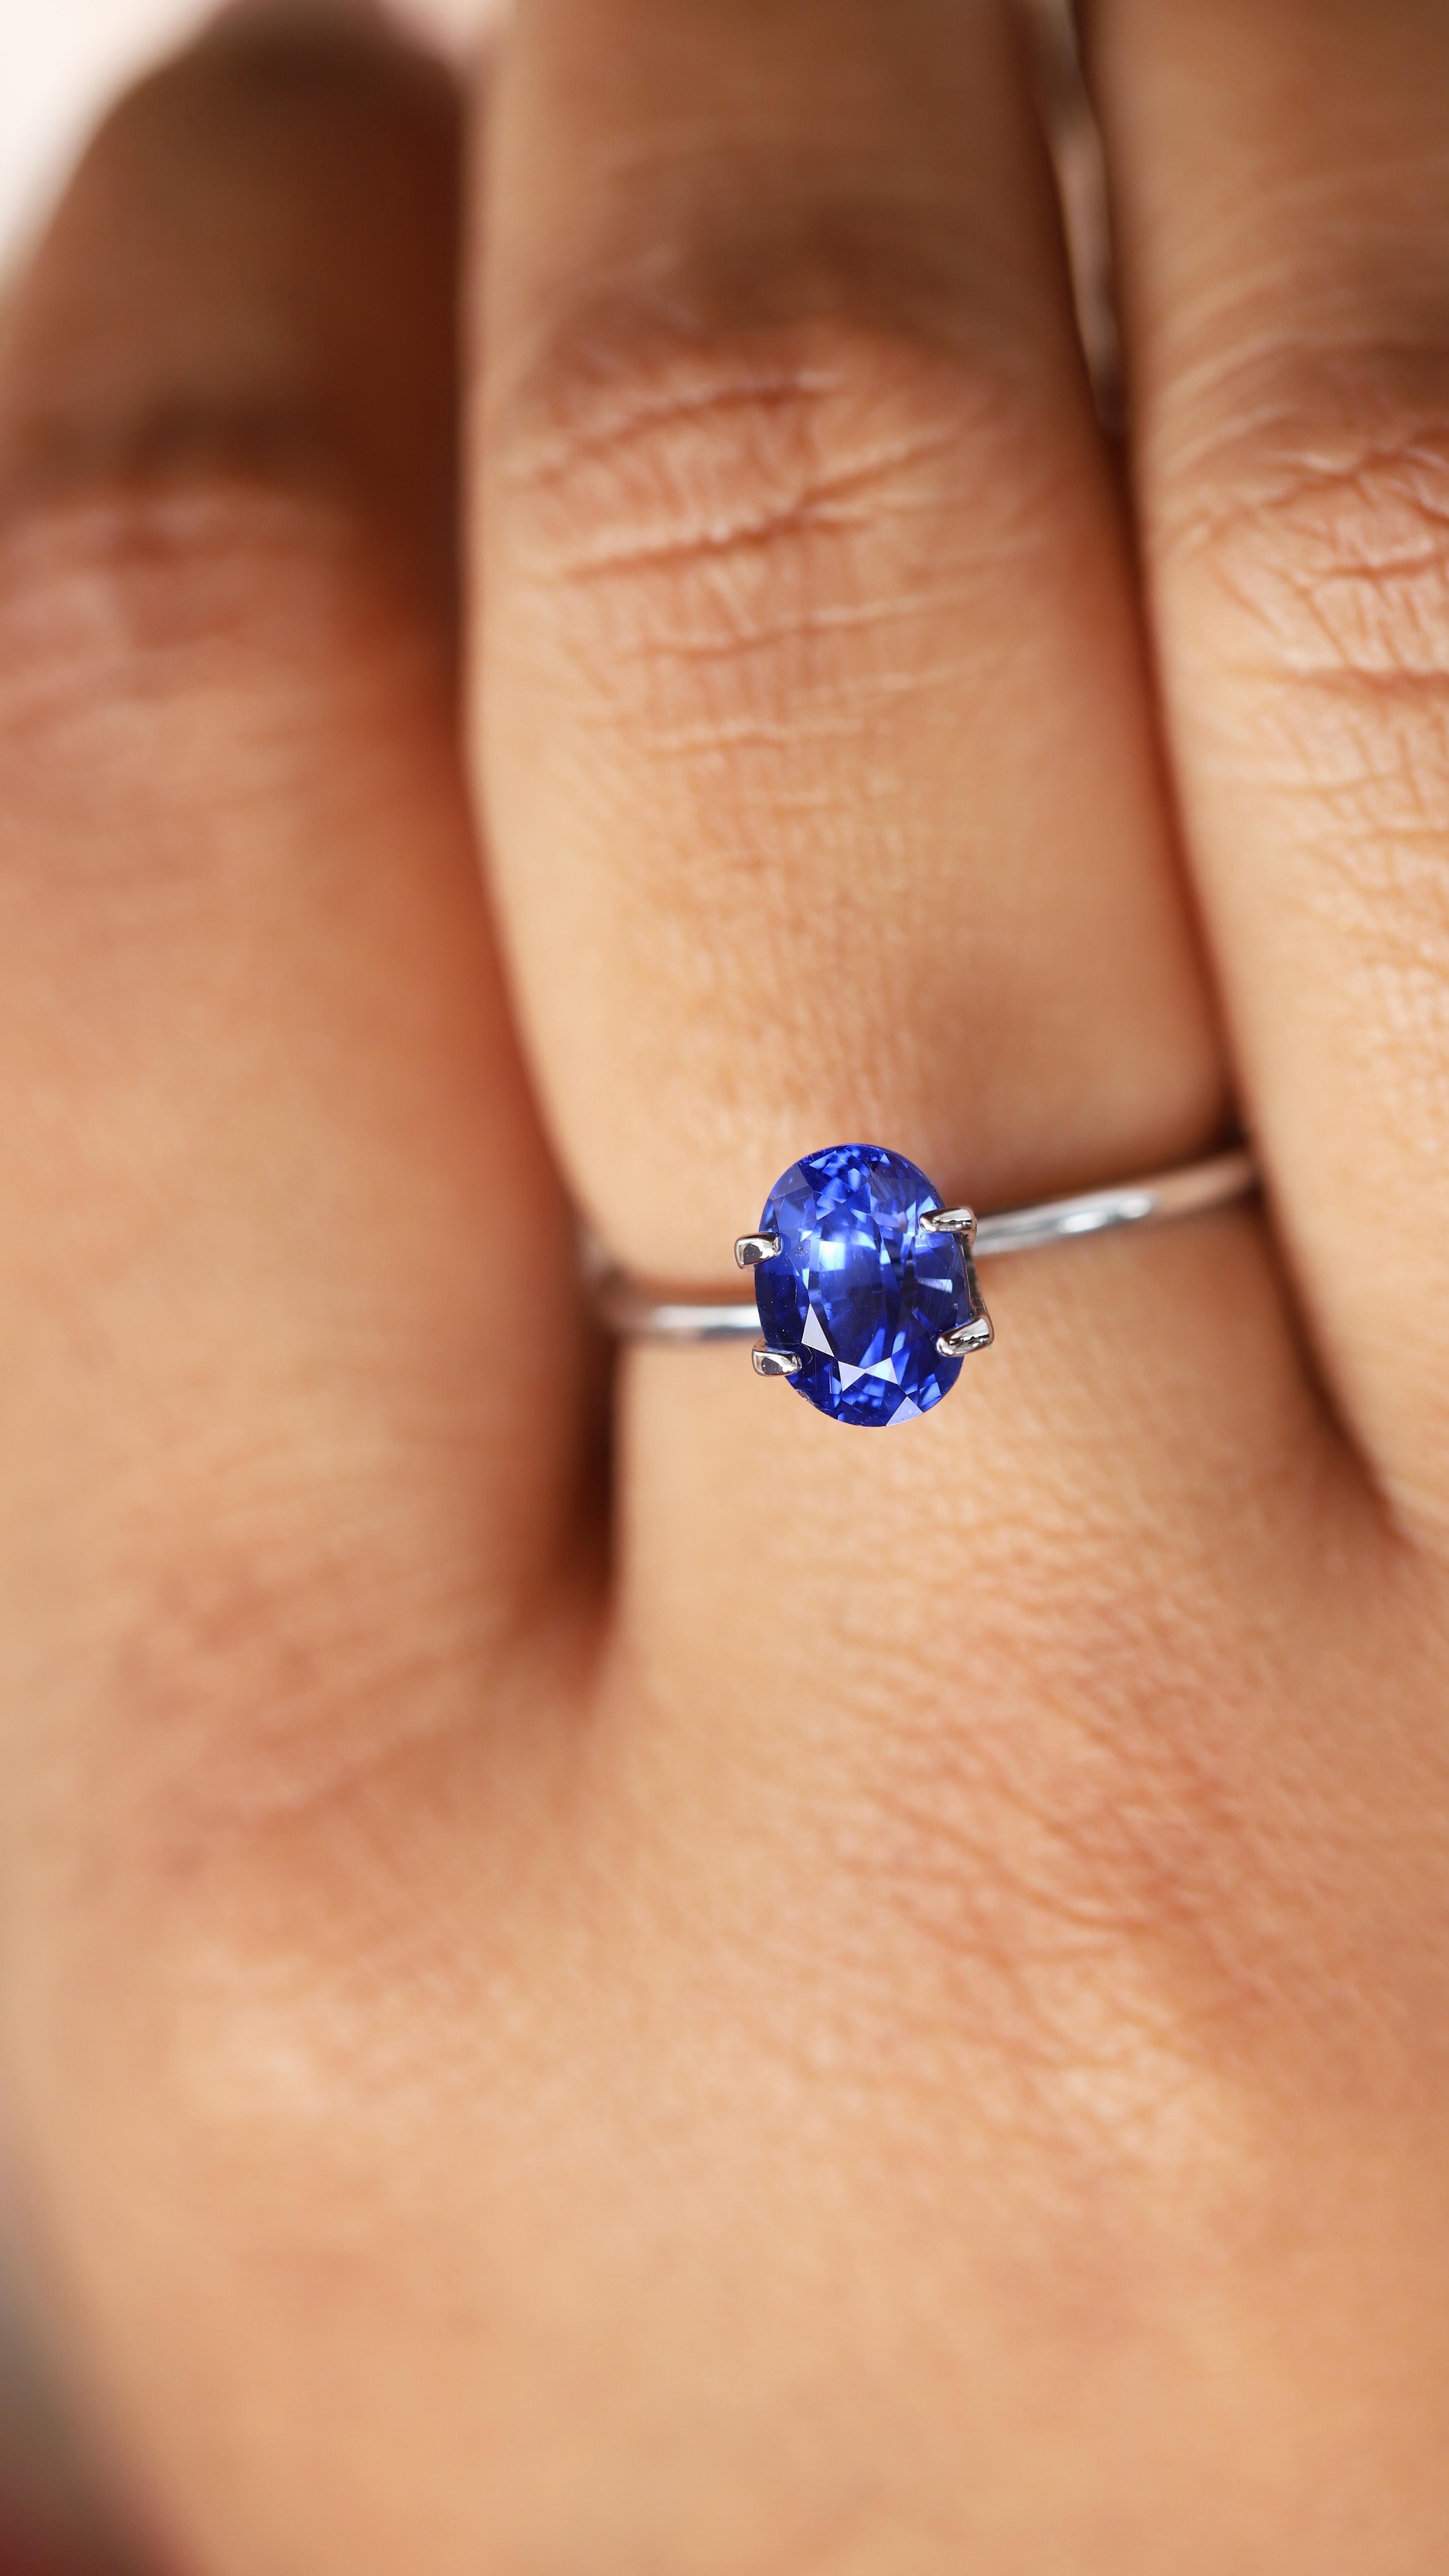 An exquisite natural sapphire, flaunting remarkable hues of vivid blue and showstopping blue brilliance. Its deep and luscious color is rare and truly admirable, especially for an unheated sapphire. 

Natural unheated vivid blue sapphire.Sourced